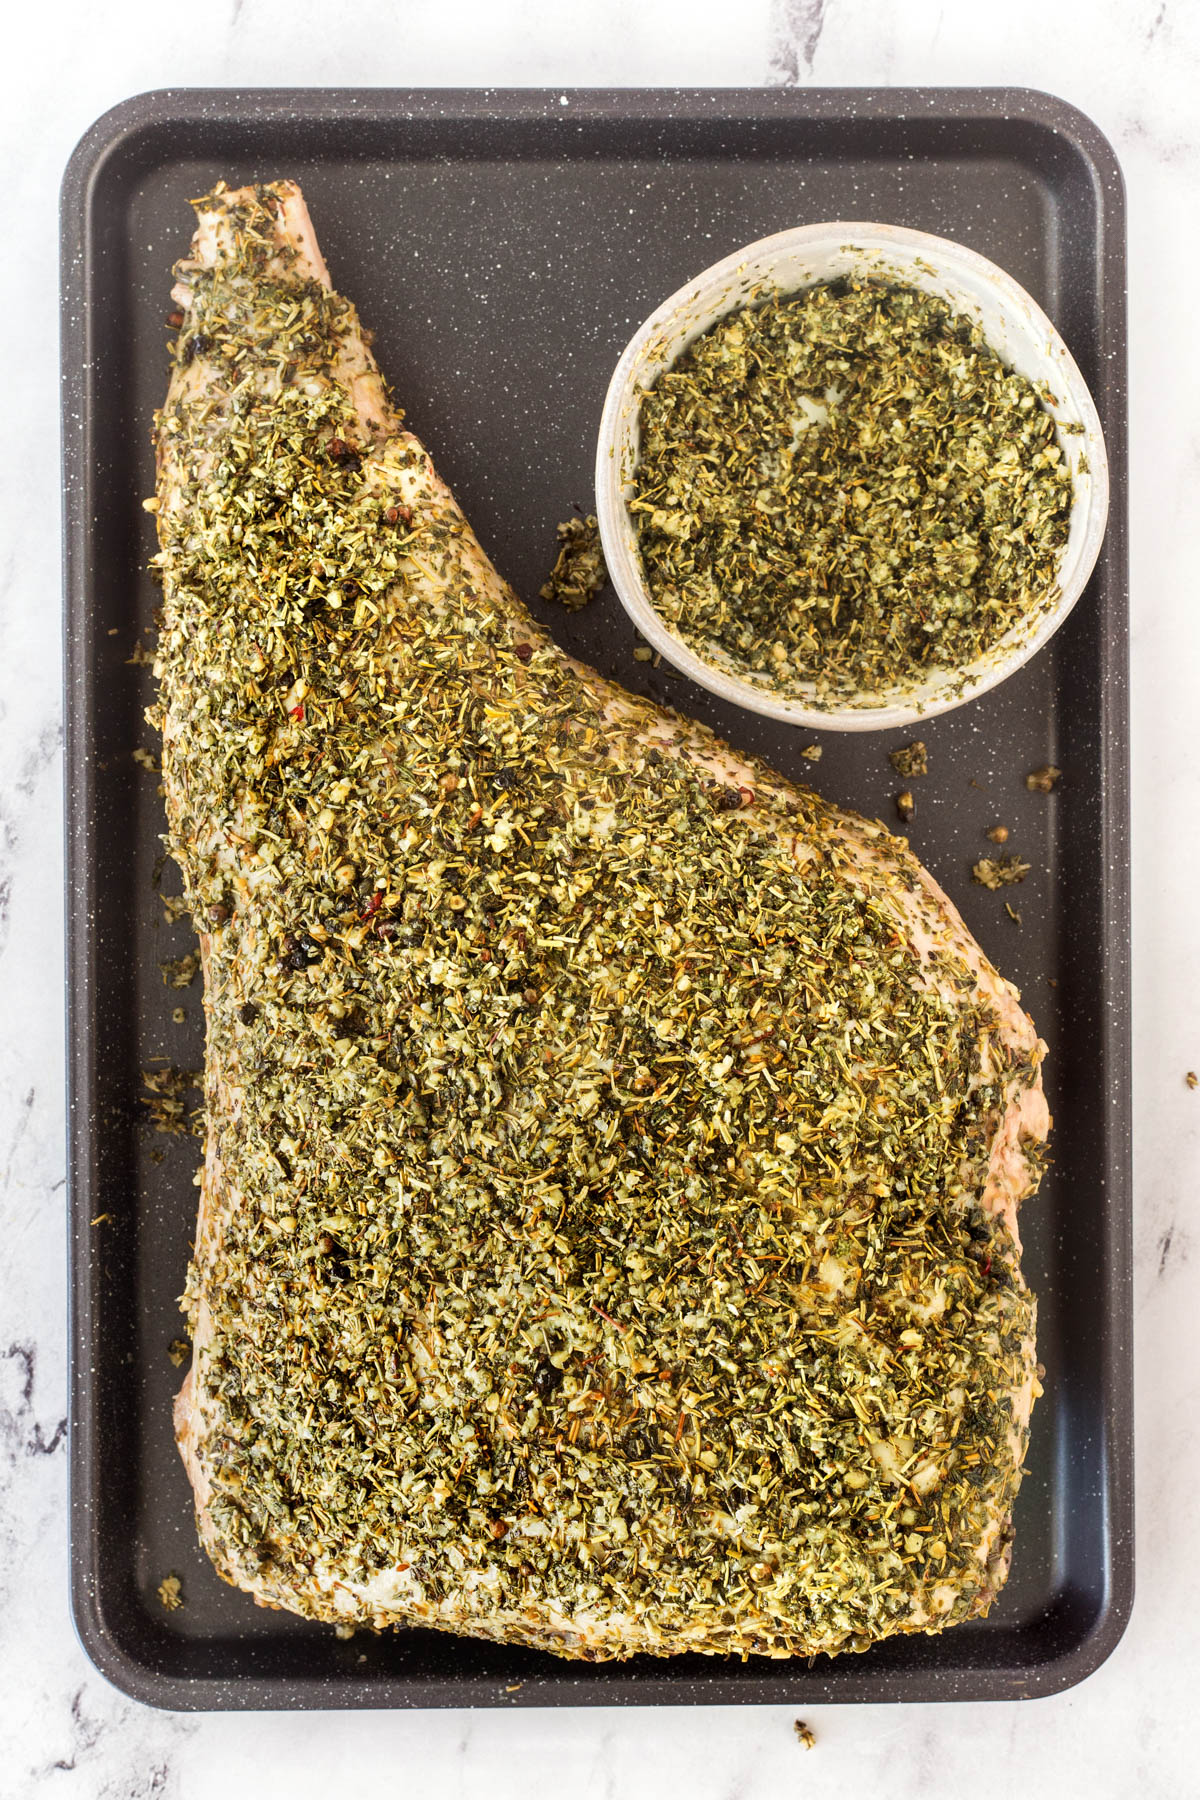 Leg of lamb rubbed with a generous coat of herbs on a baking sheet.